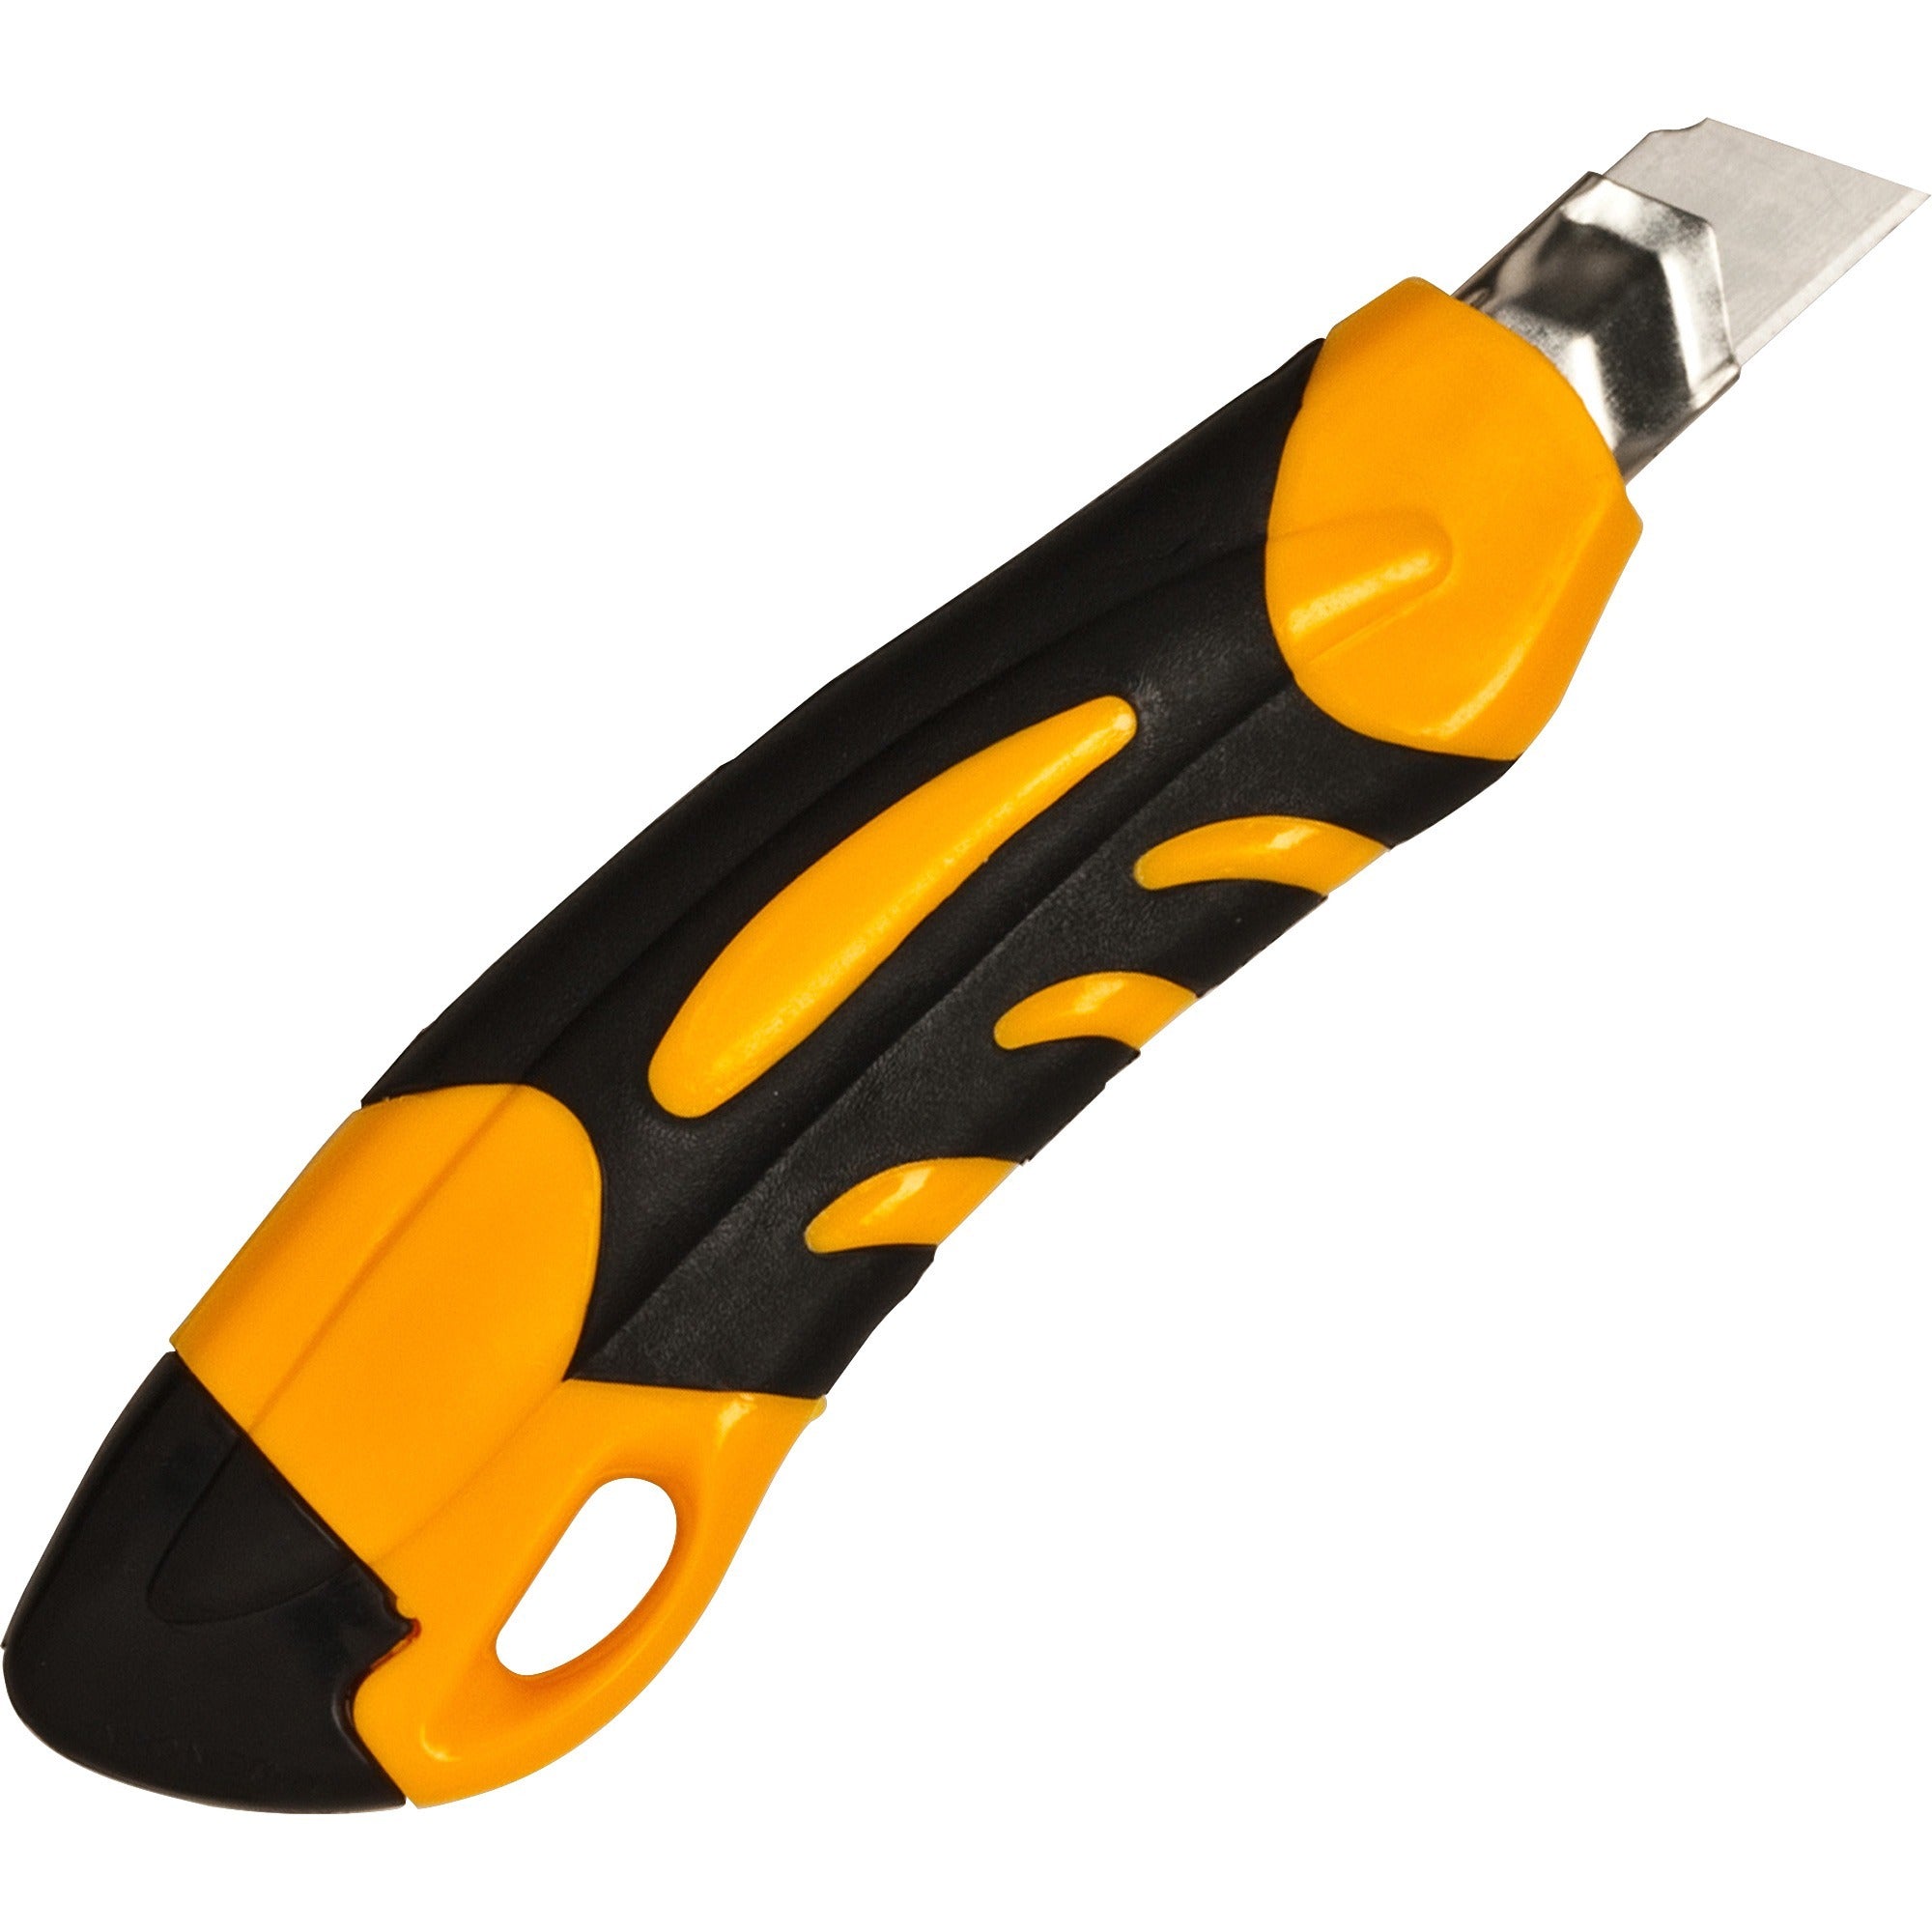 Sparco PVC Anti-Slip Rubber Grip Utility Knife - Stainless Steel Blade - Heavy Duty - Yellow - 1 Each - 